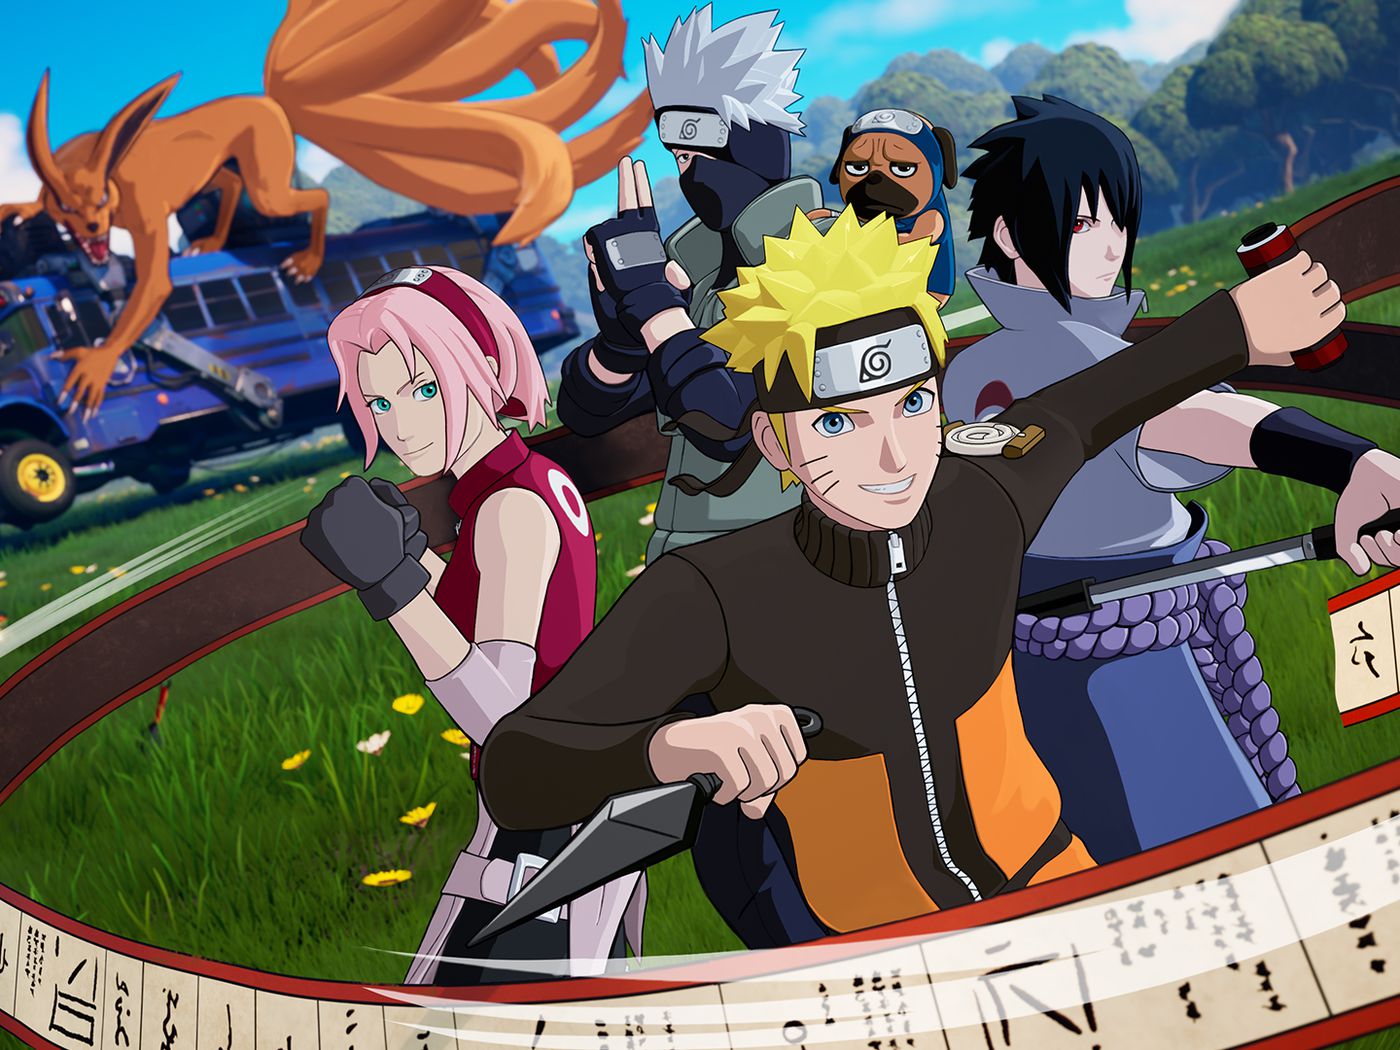 Fortnite's Naruto collab includes more than just skins